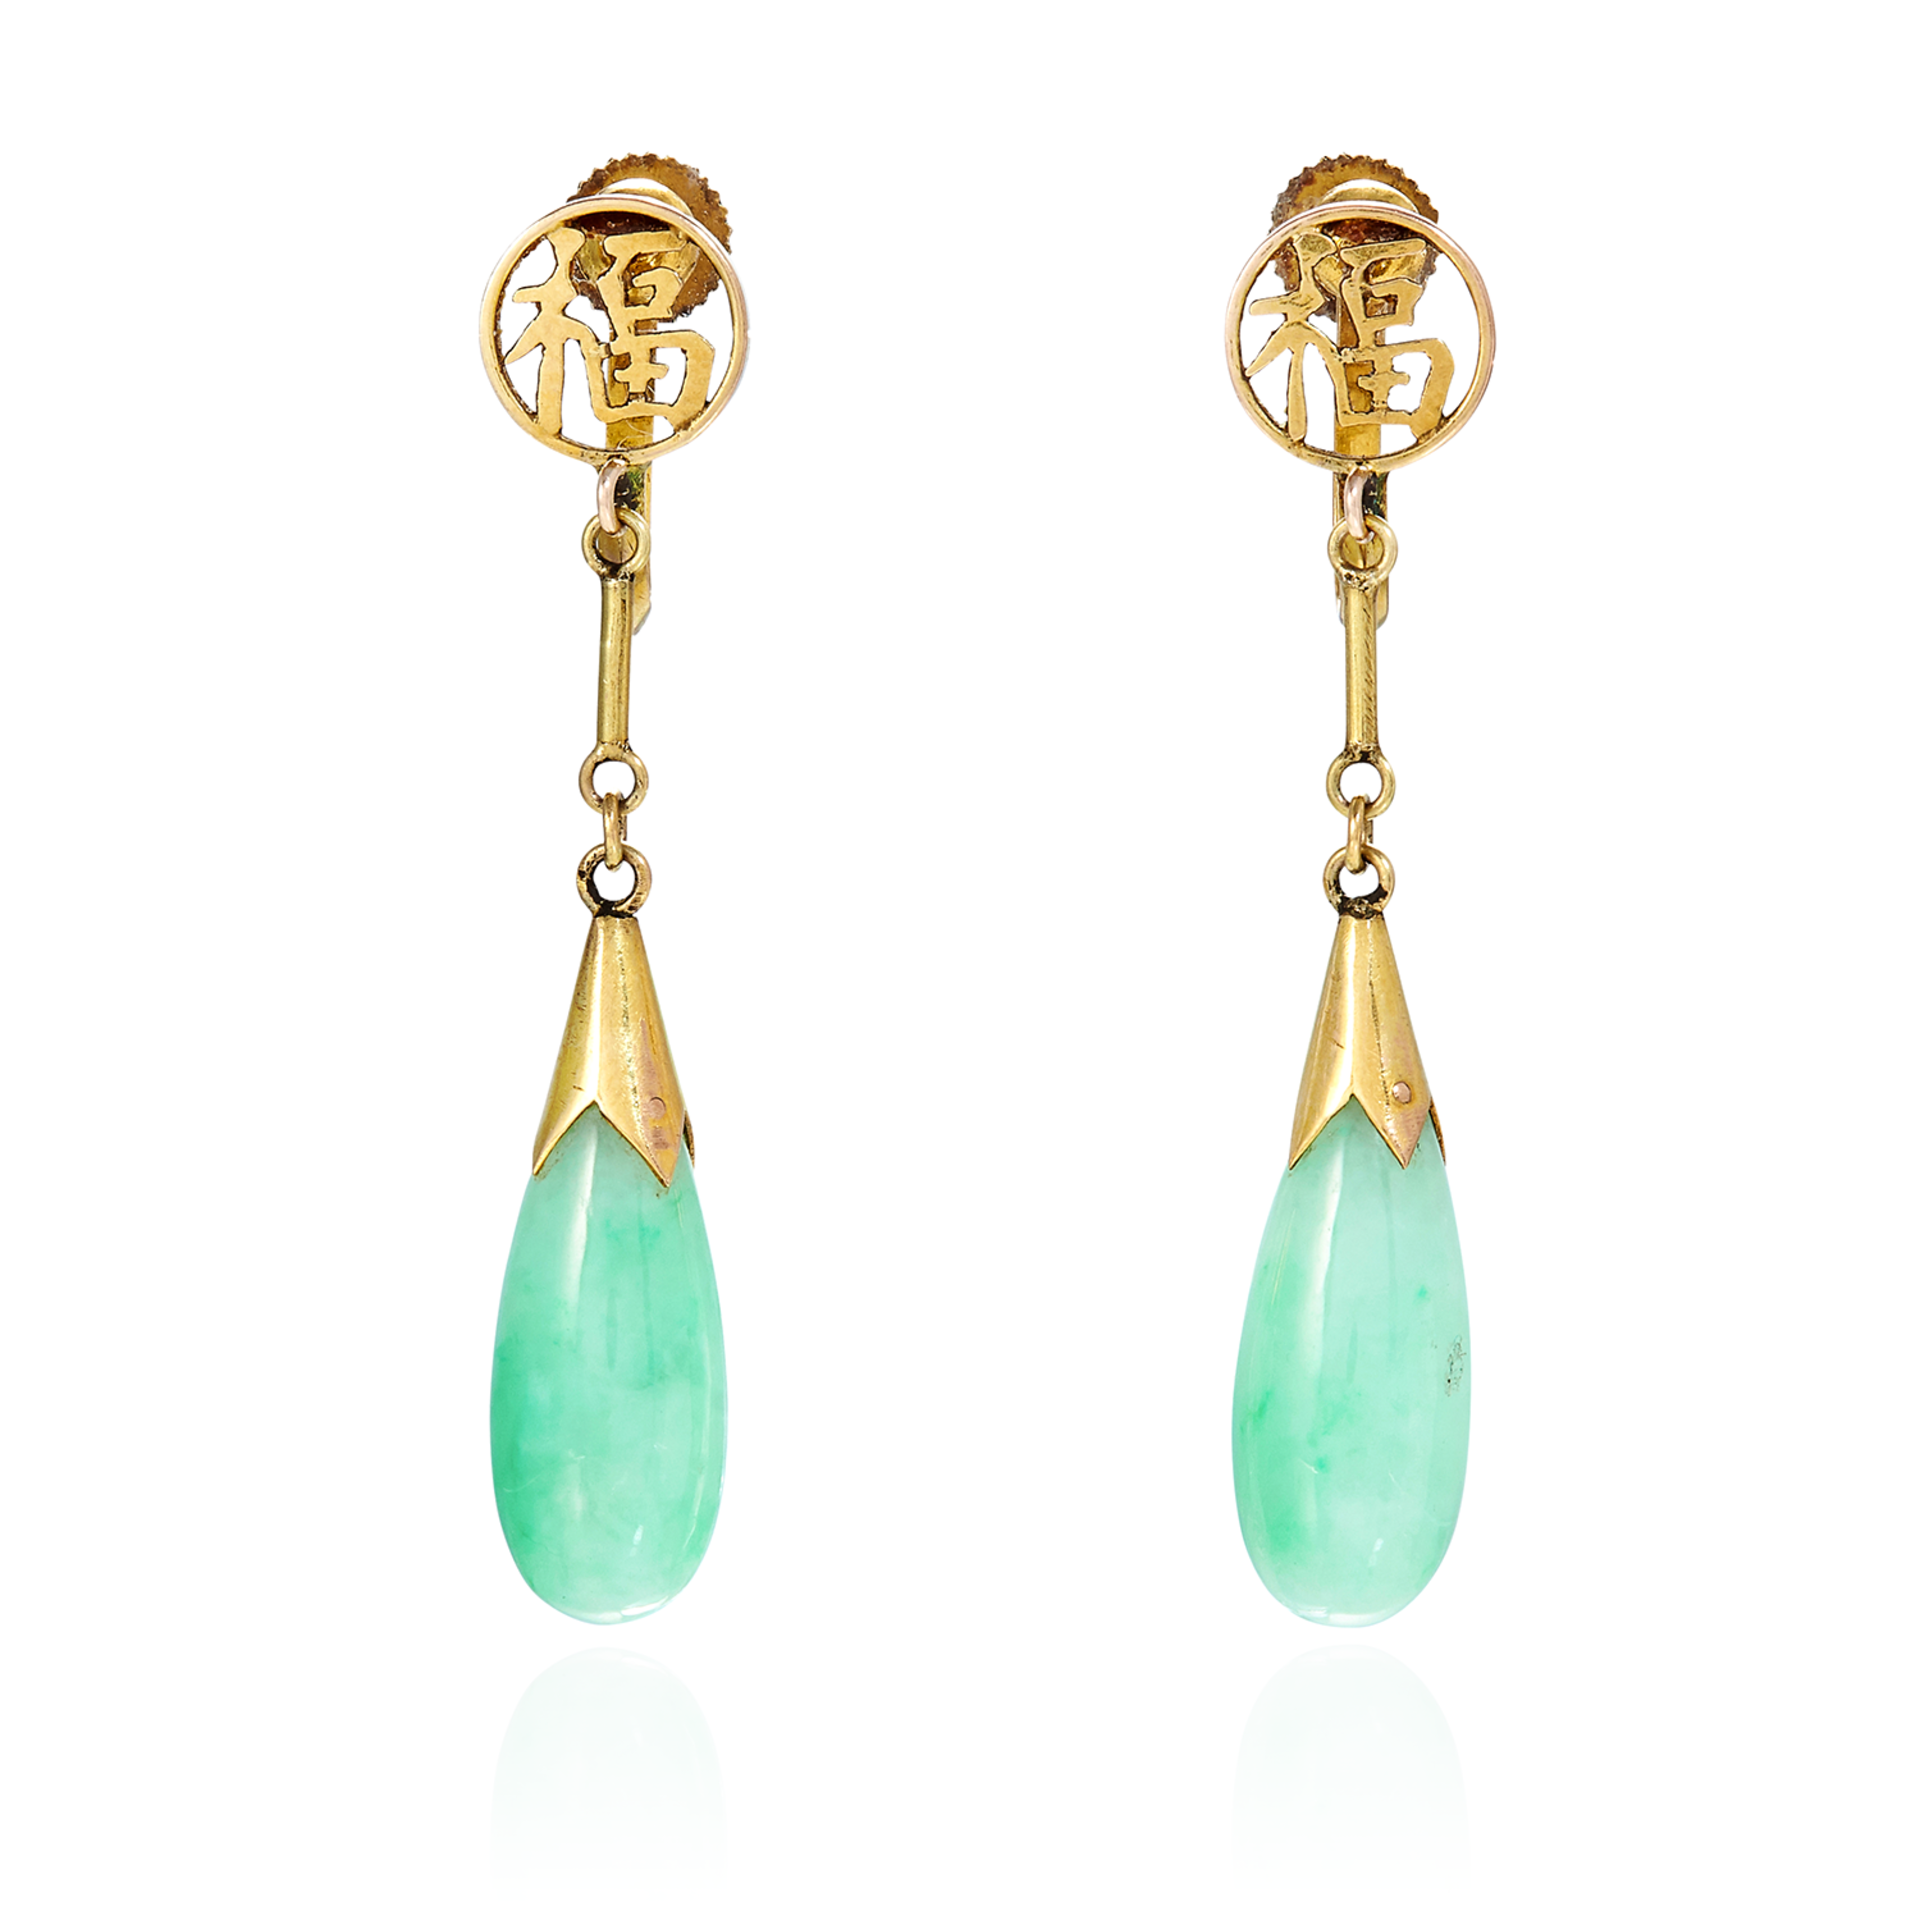 A PAIR OF CHINESE JADEITE JADE DROP EARRINGS in yellow gold, each designed as a polished tapering